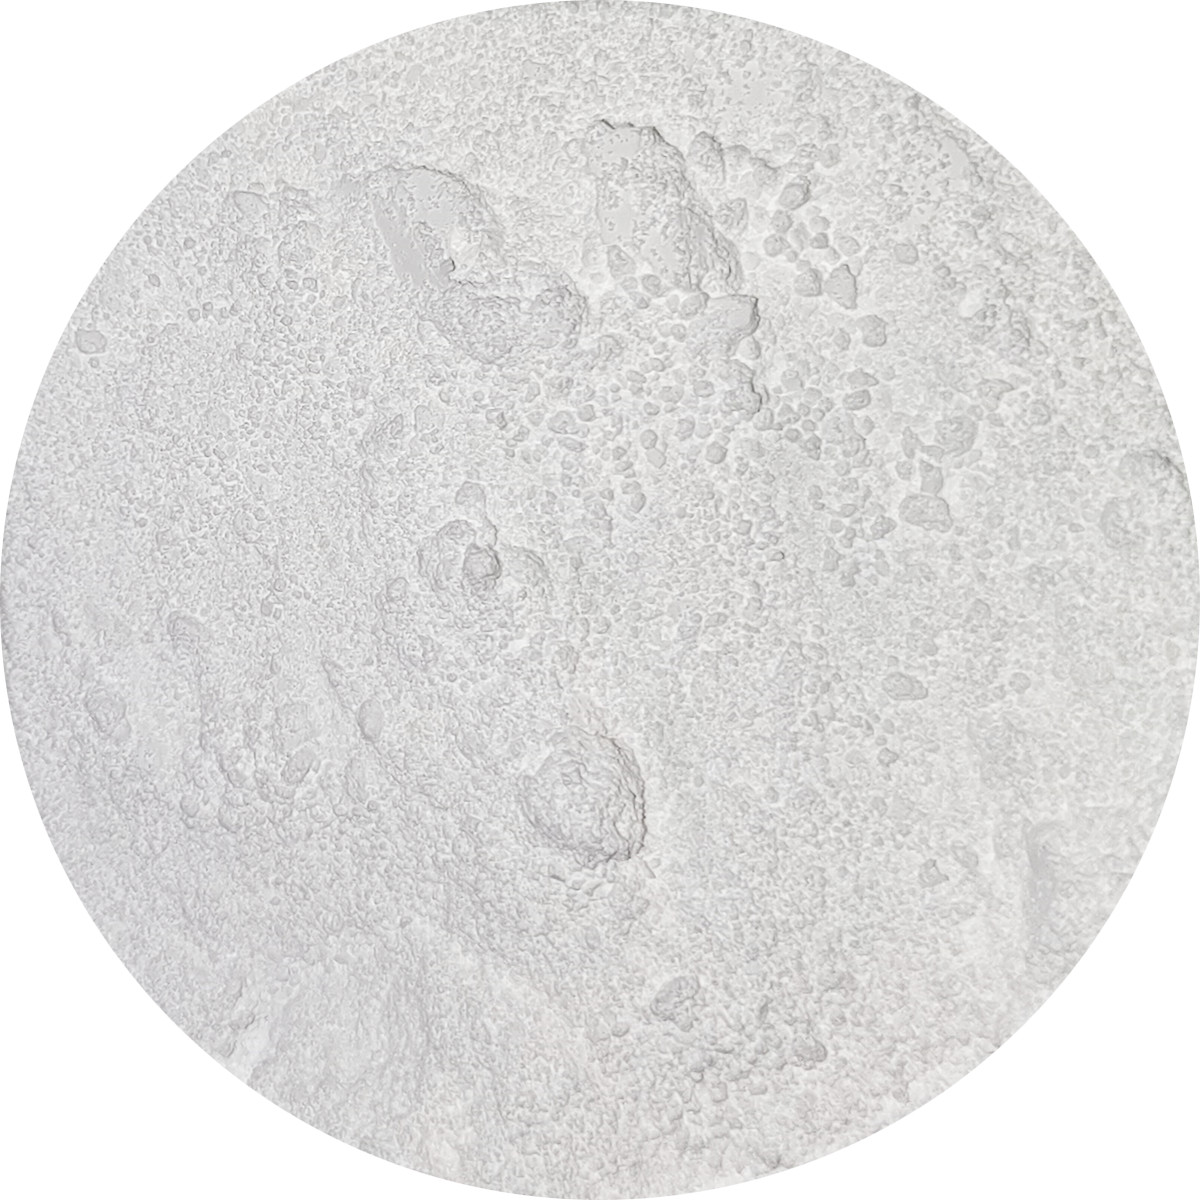 China Wholesale Allantoin Ingredient Suppliers Factories - Uni-Carbomer 981G / Carbomer  – Uniproma